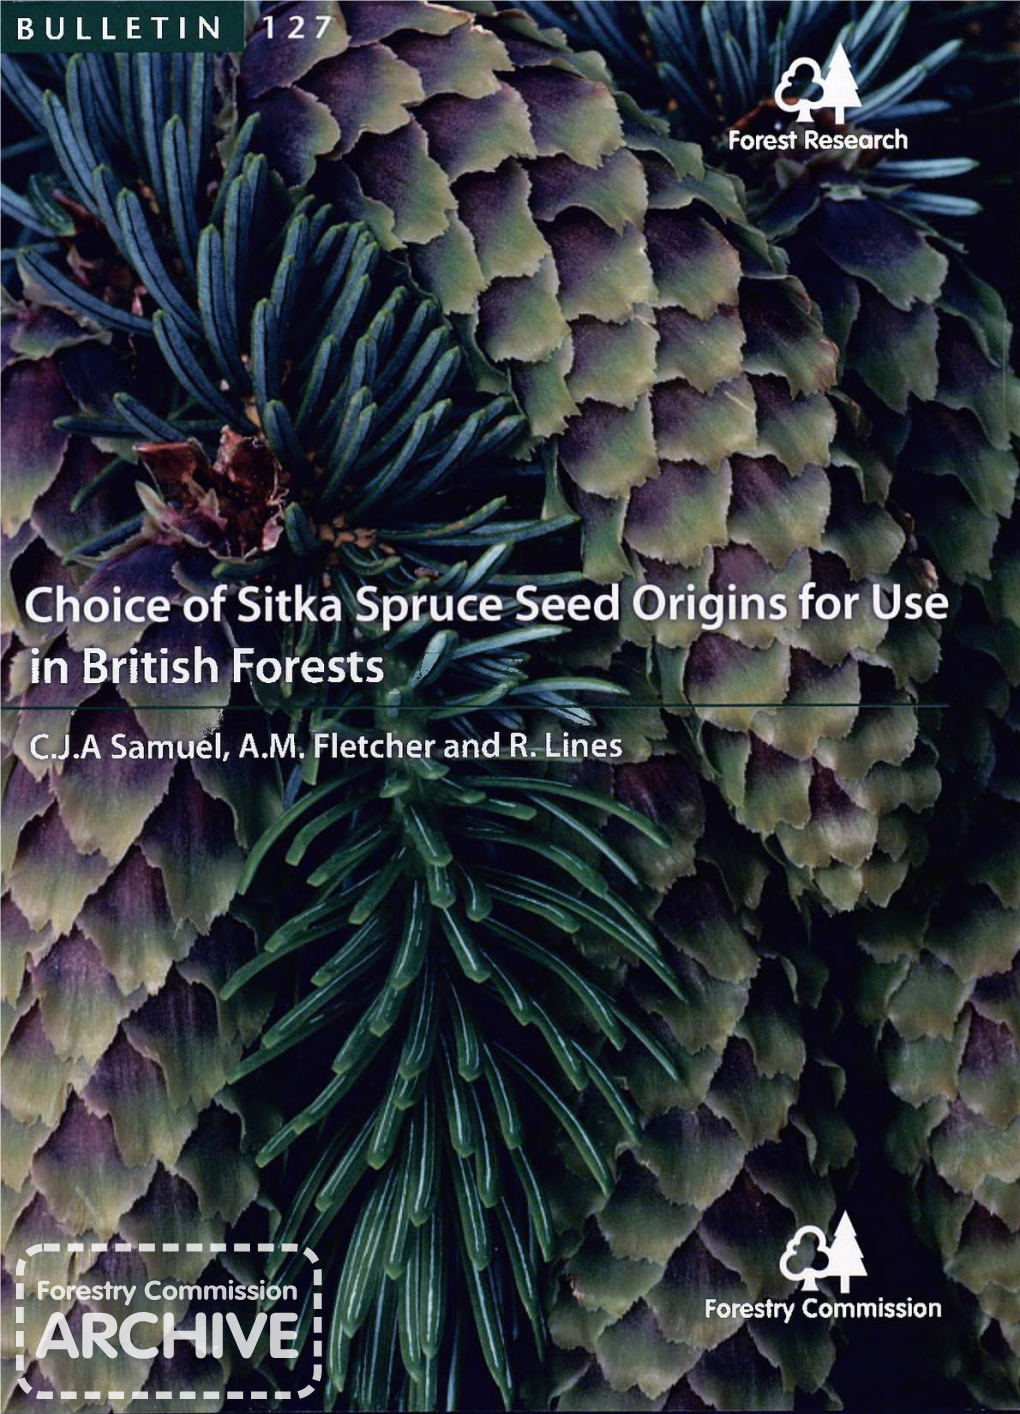 Choice of Sitka Spruce Seed Origins in British Forests